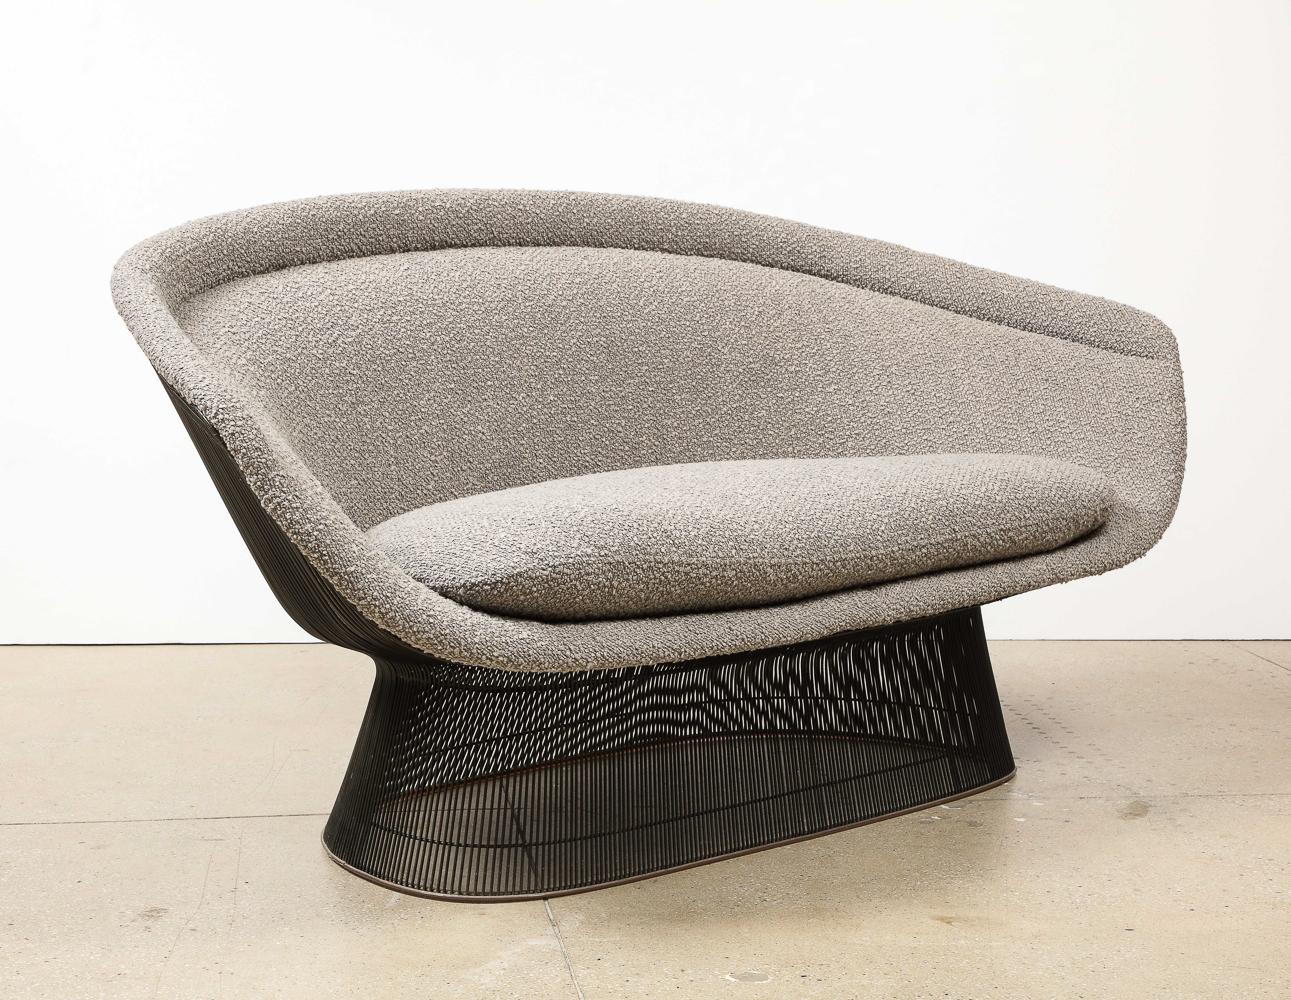 Bronze-plated steel, upholstery. Produced by Knoll. Rare bronze finish variant with new upholstery.